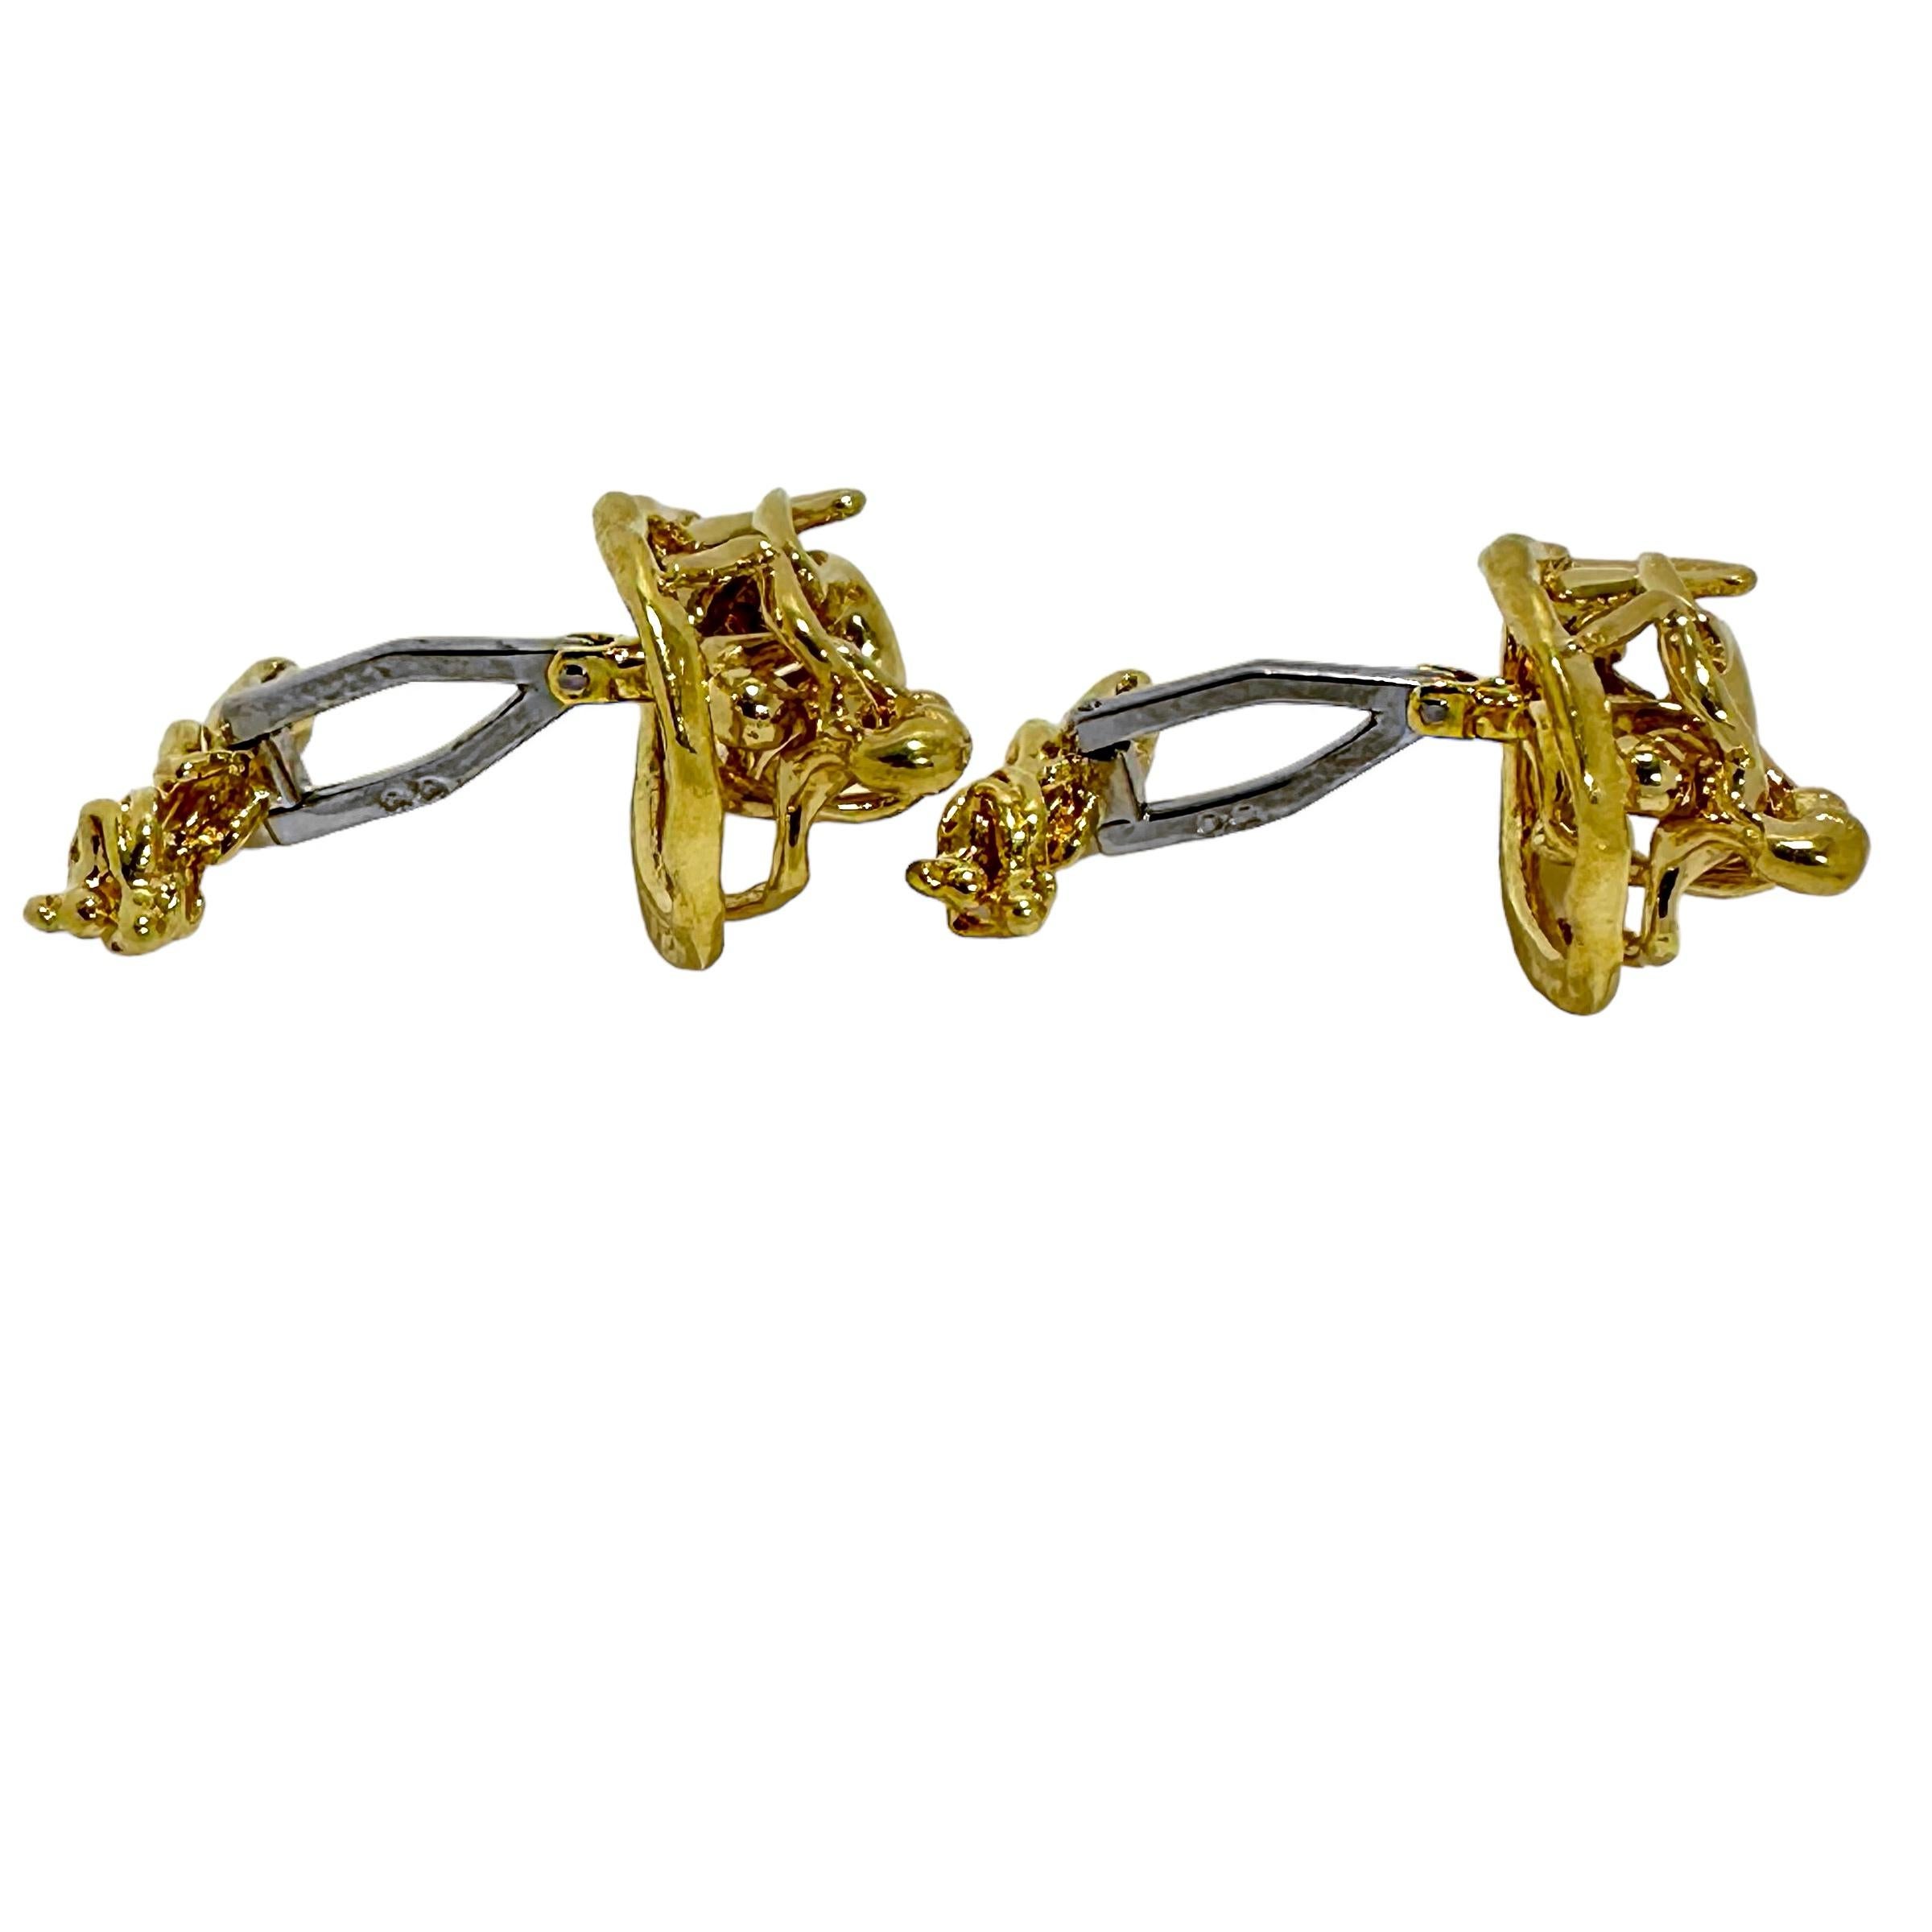 Mid-20th Century French 18k Yellow Gold Artisan Hand Crafted Erotic Cuff Links For Sale 2